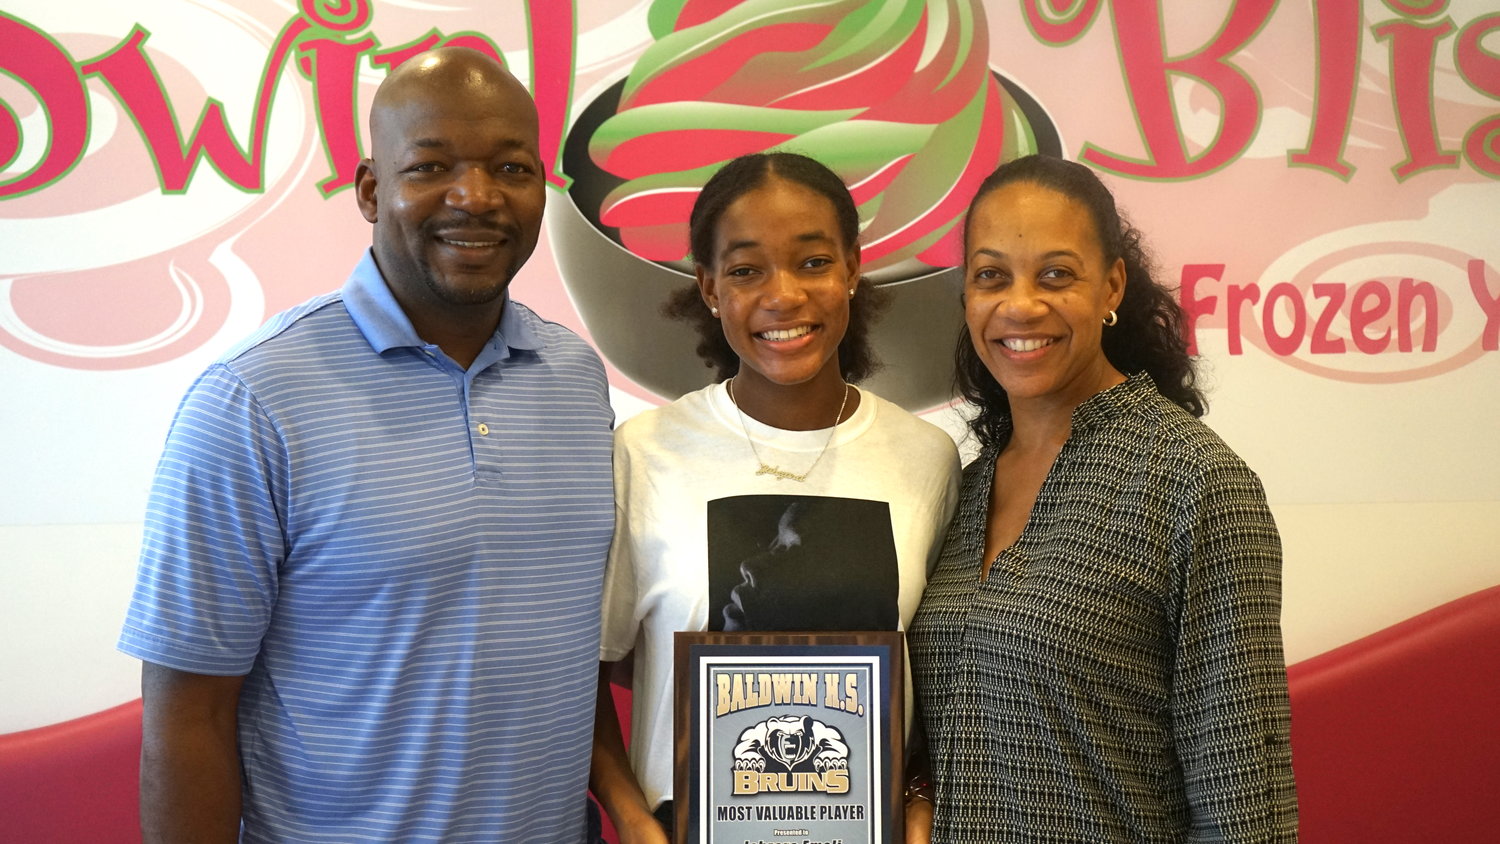 Emeli’s parents have supported their daughter’s track career, making sure she gets to her practices and races with various organizations, including the Baldwin Police Athletic League and V-Tesse Track Club of Long Island.